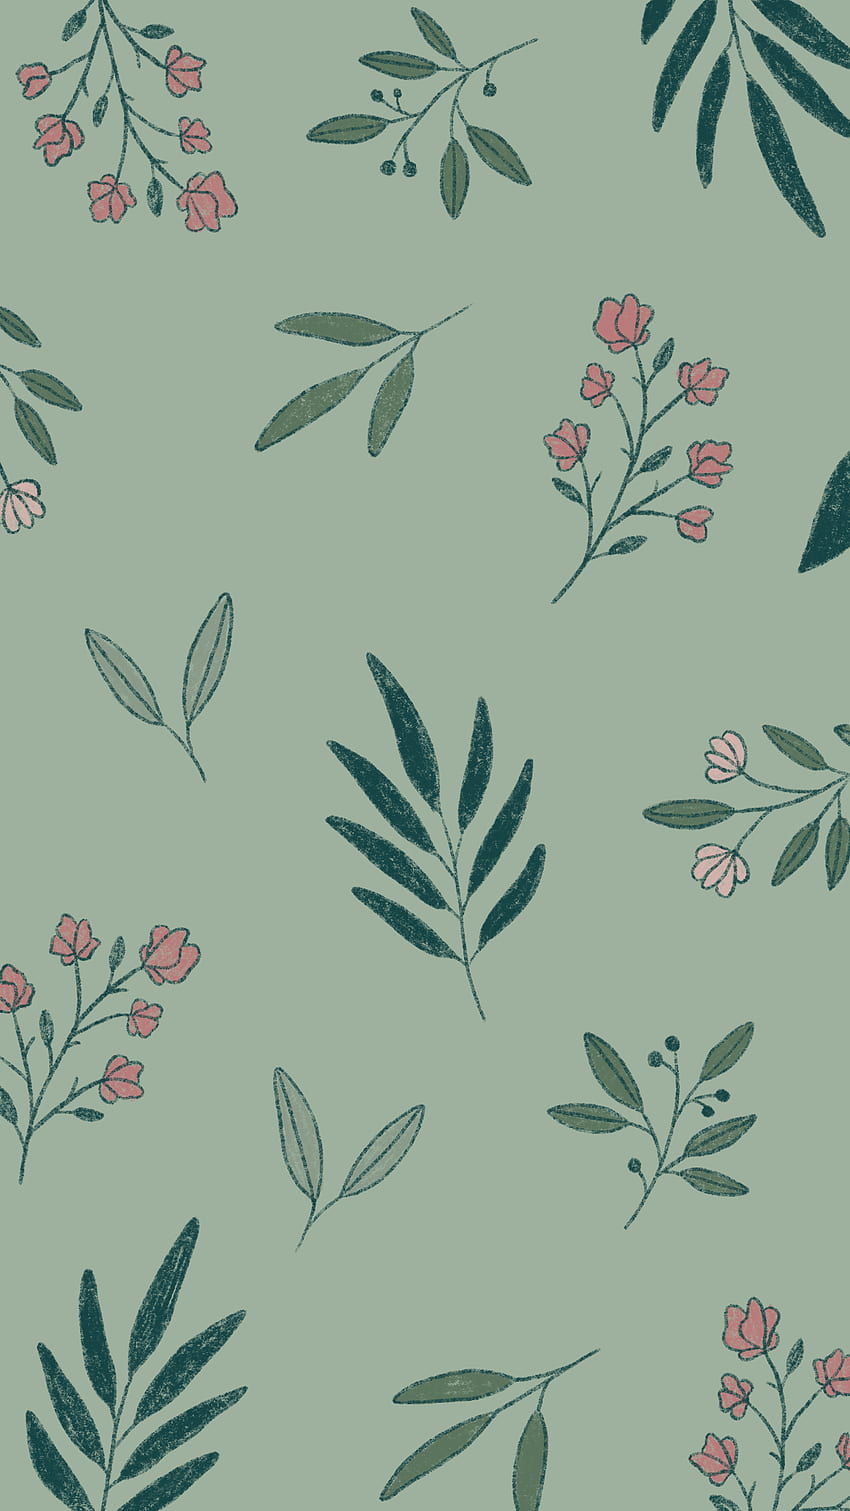 Floral iPhone Background in 2020. Floral iphone background, iPhone green, iPhone, Drawn 見てみる HD電話の壁紙